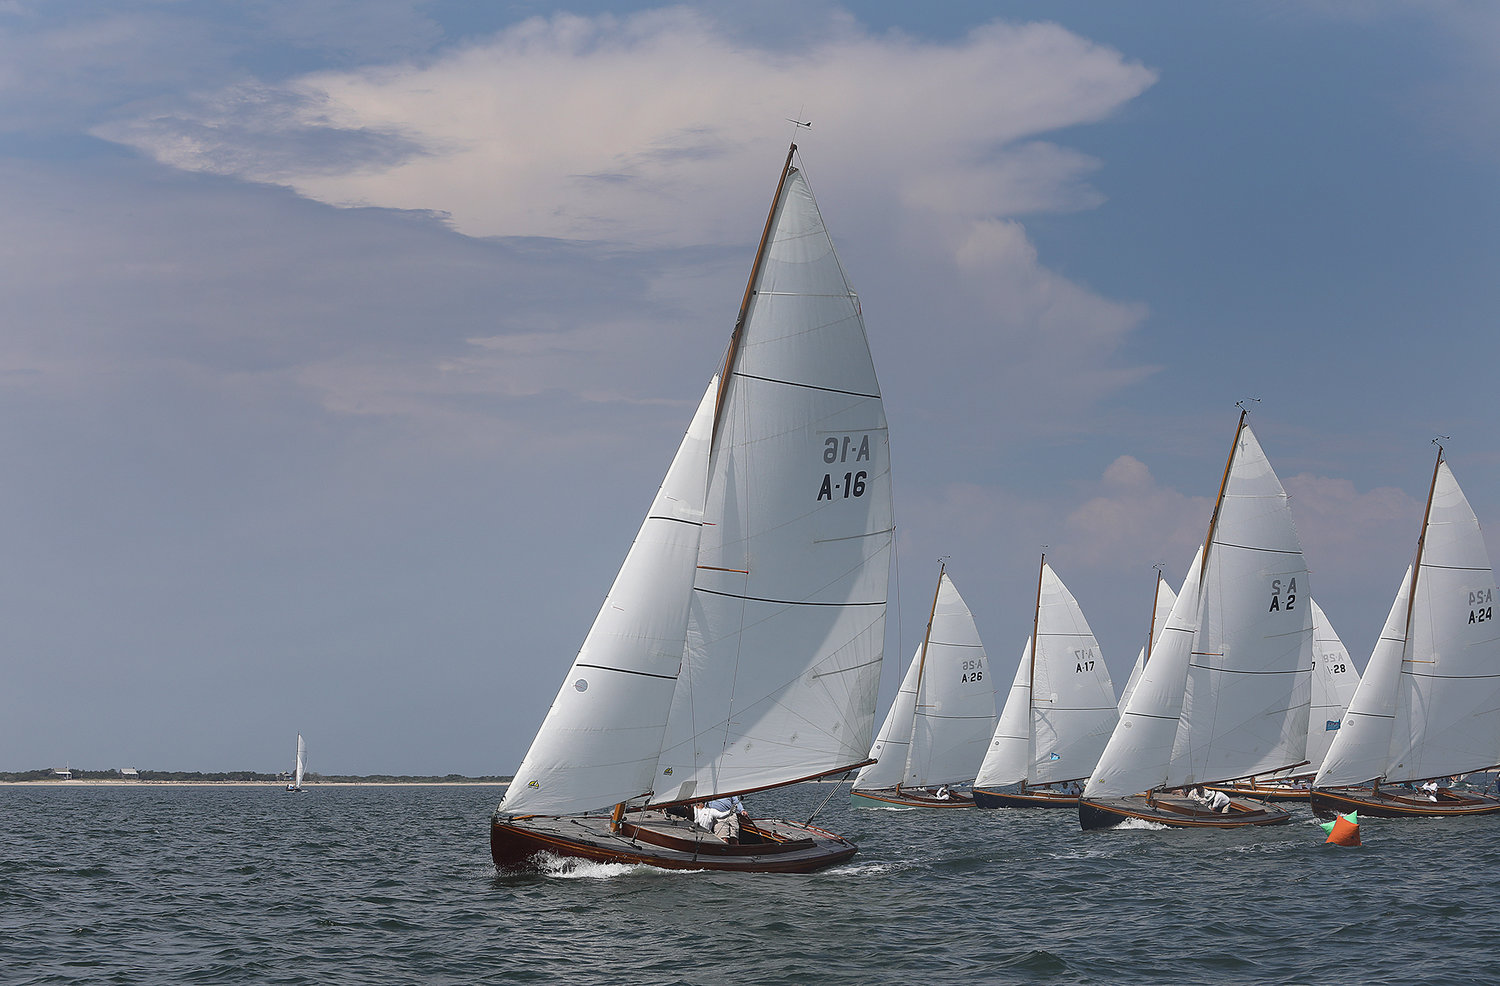 Alerions compete in the first leg of the One Design Regatta in Nantucket Harbor on the opening day of Race Week 2021.